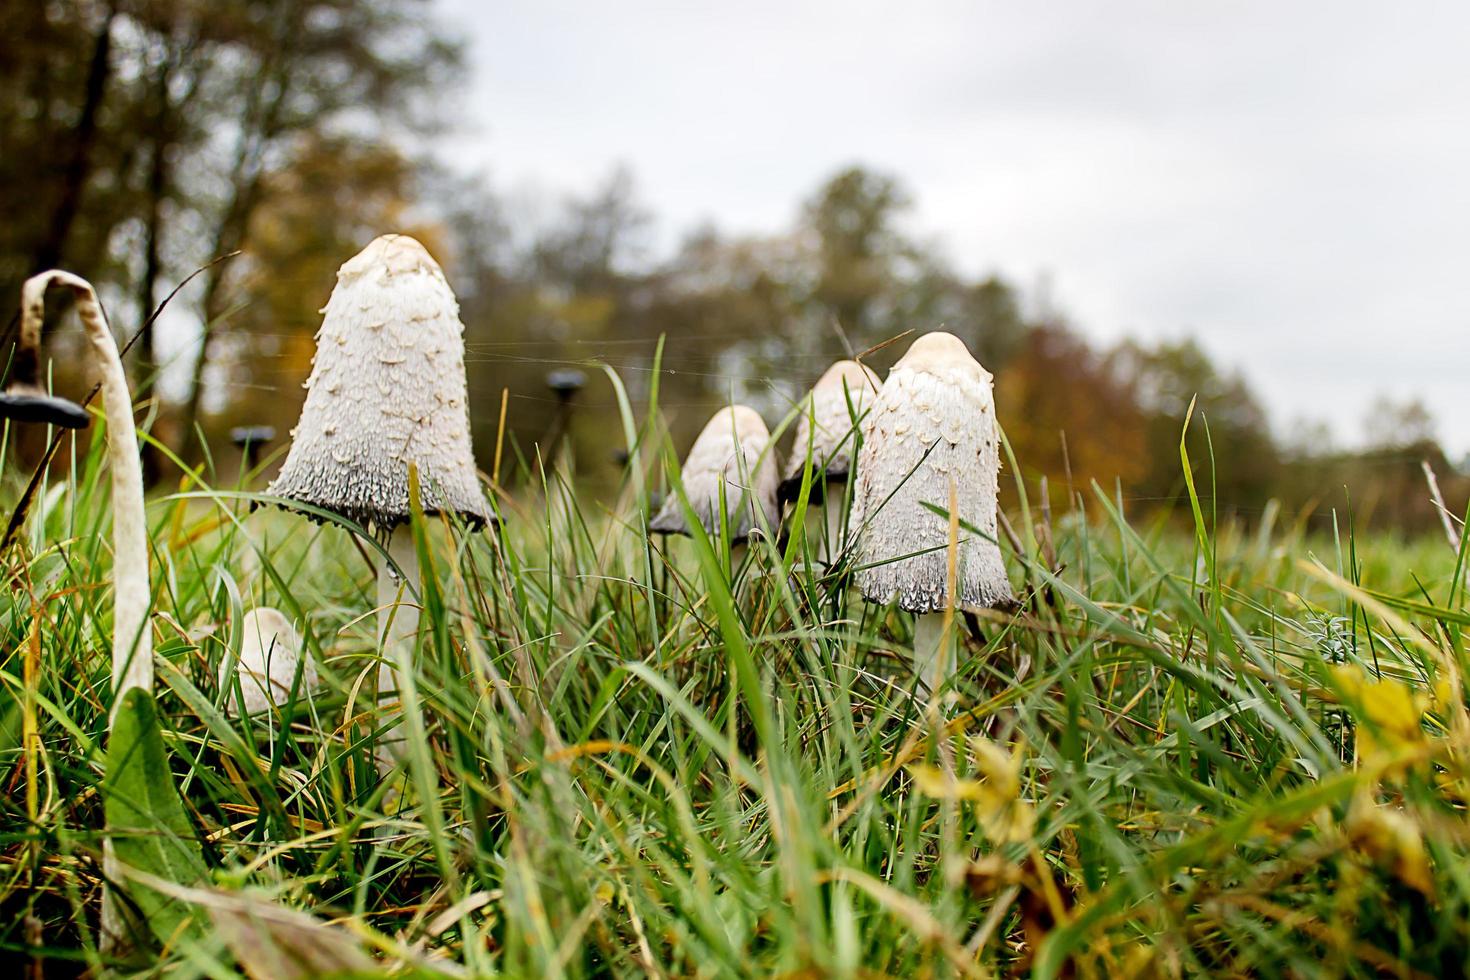 Inedible poisonous mushrooms in the grass against a gray sky in autumn photo